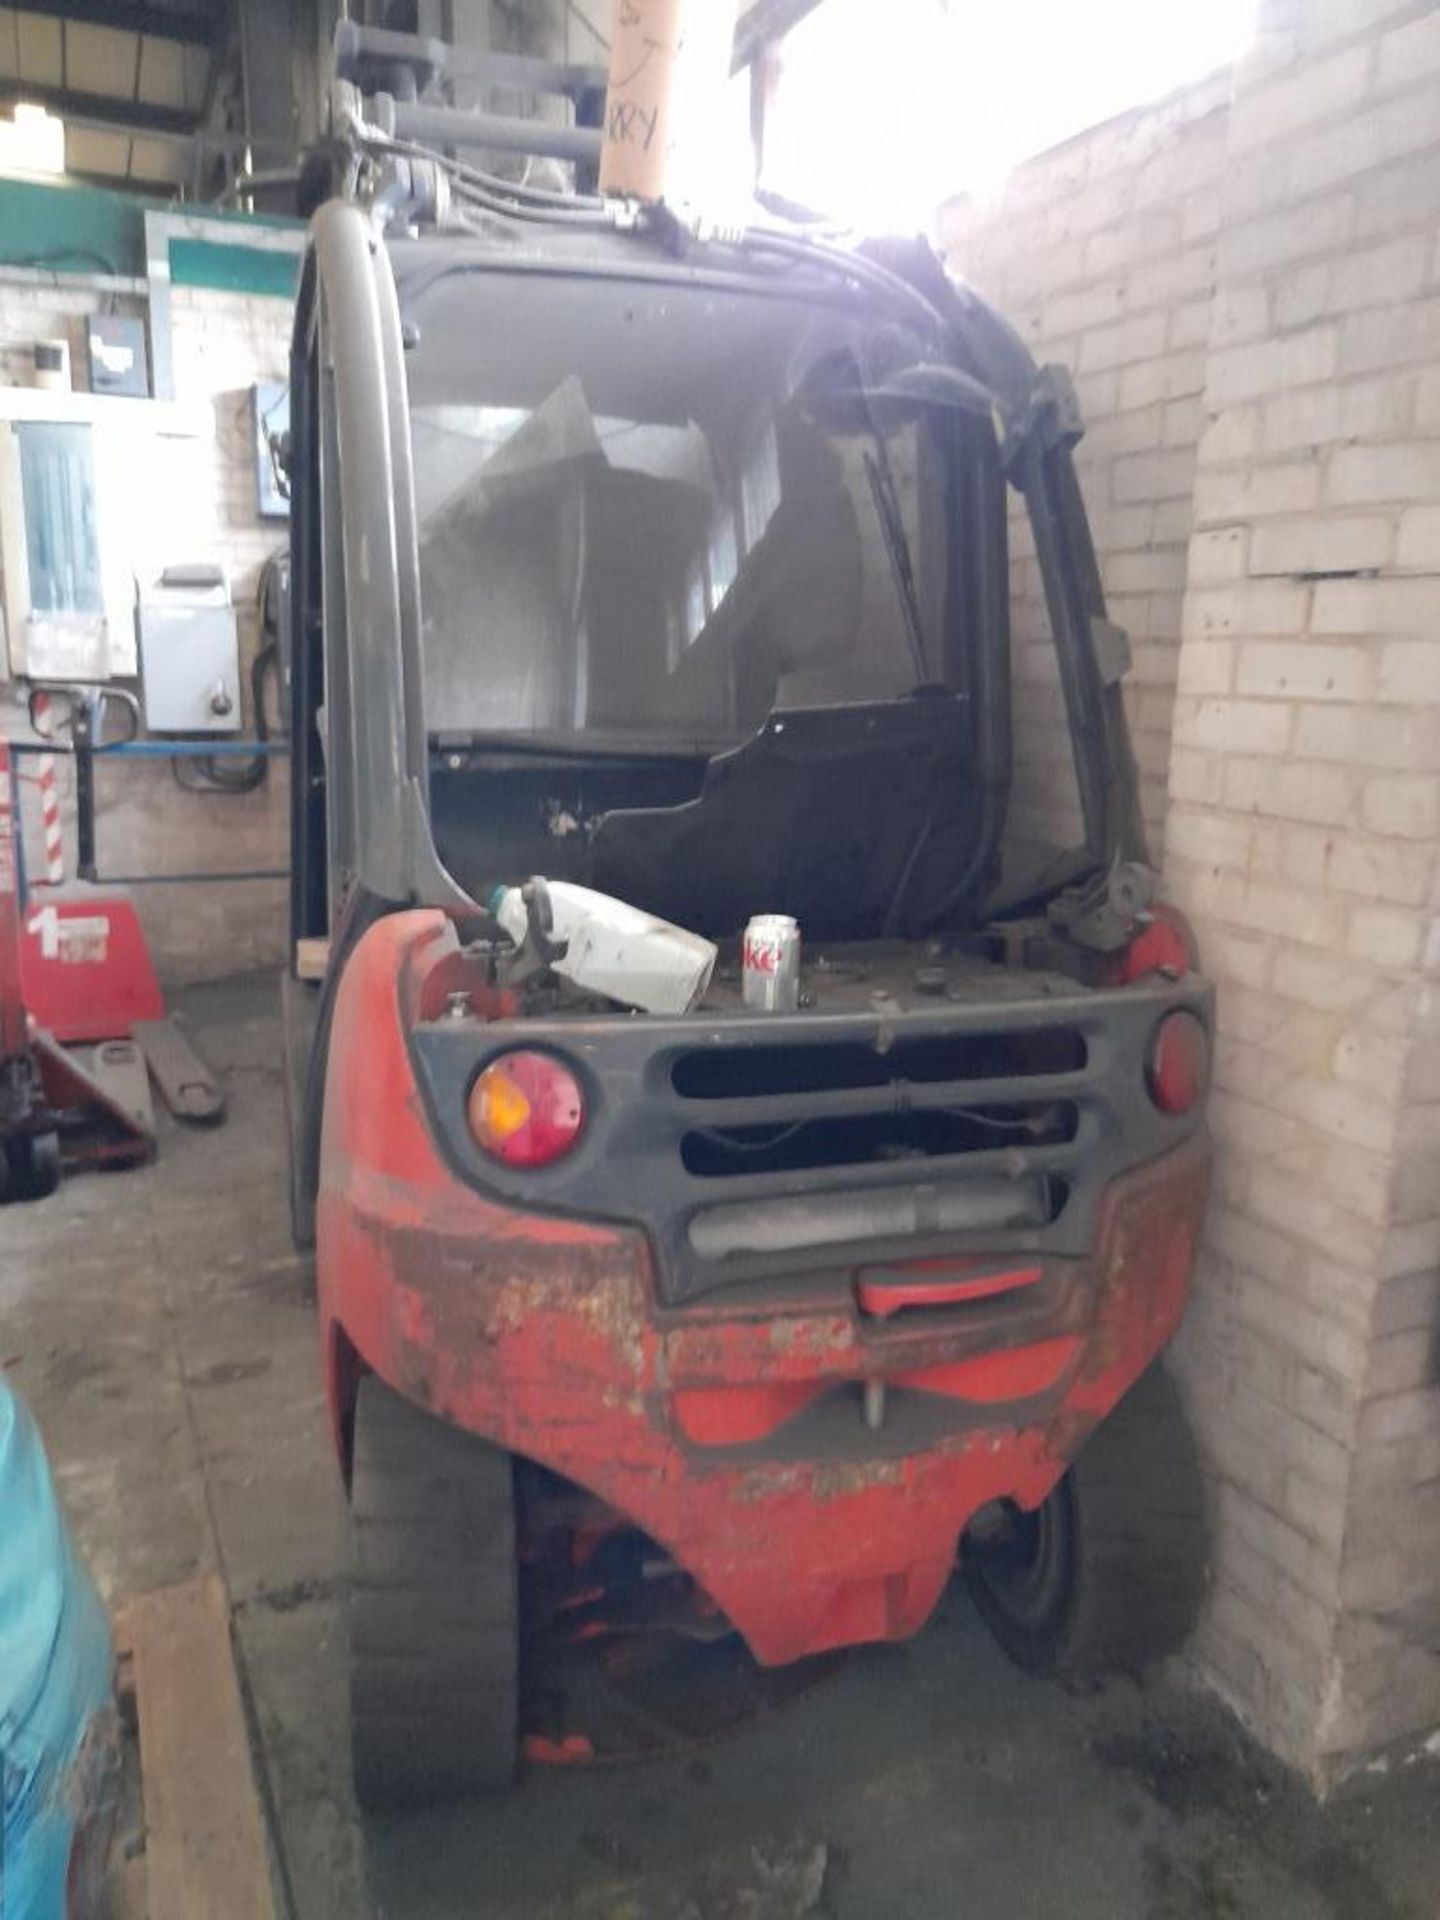 Linde H20 2,000kg gas Forklift Truck, sold as spares and repairs - Image 2 of 3